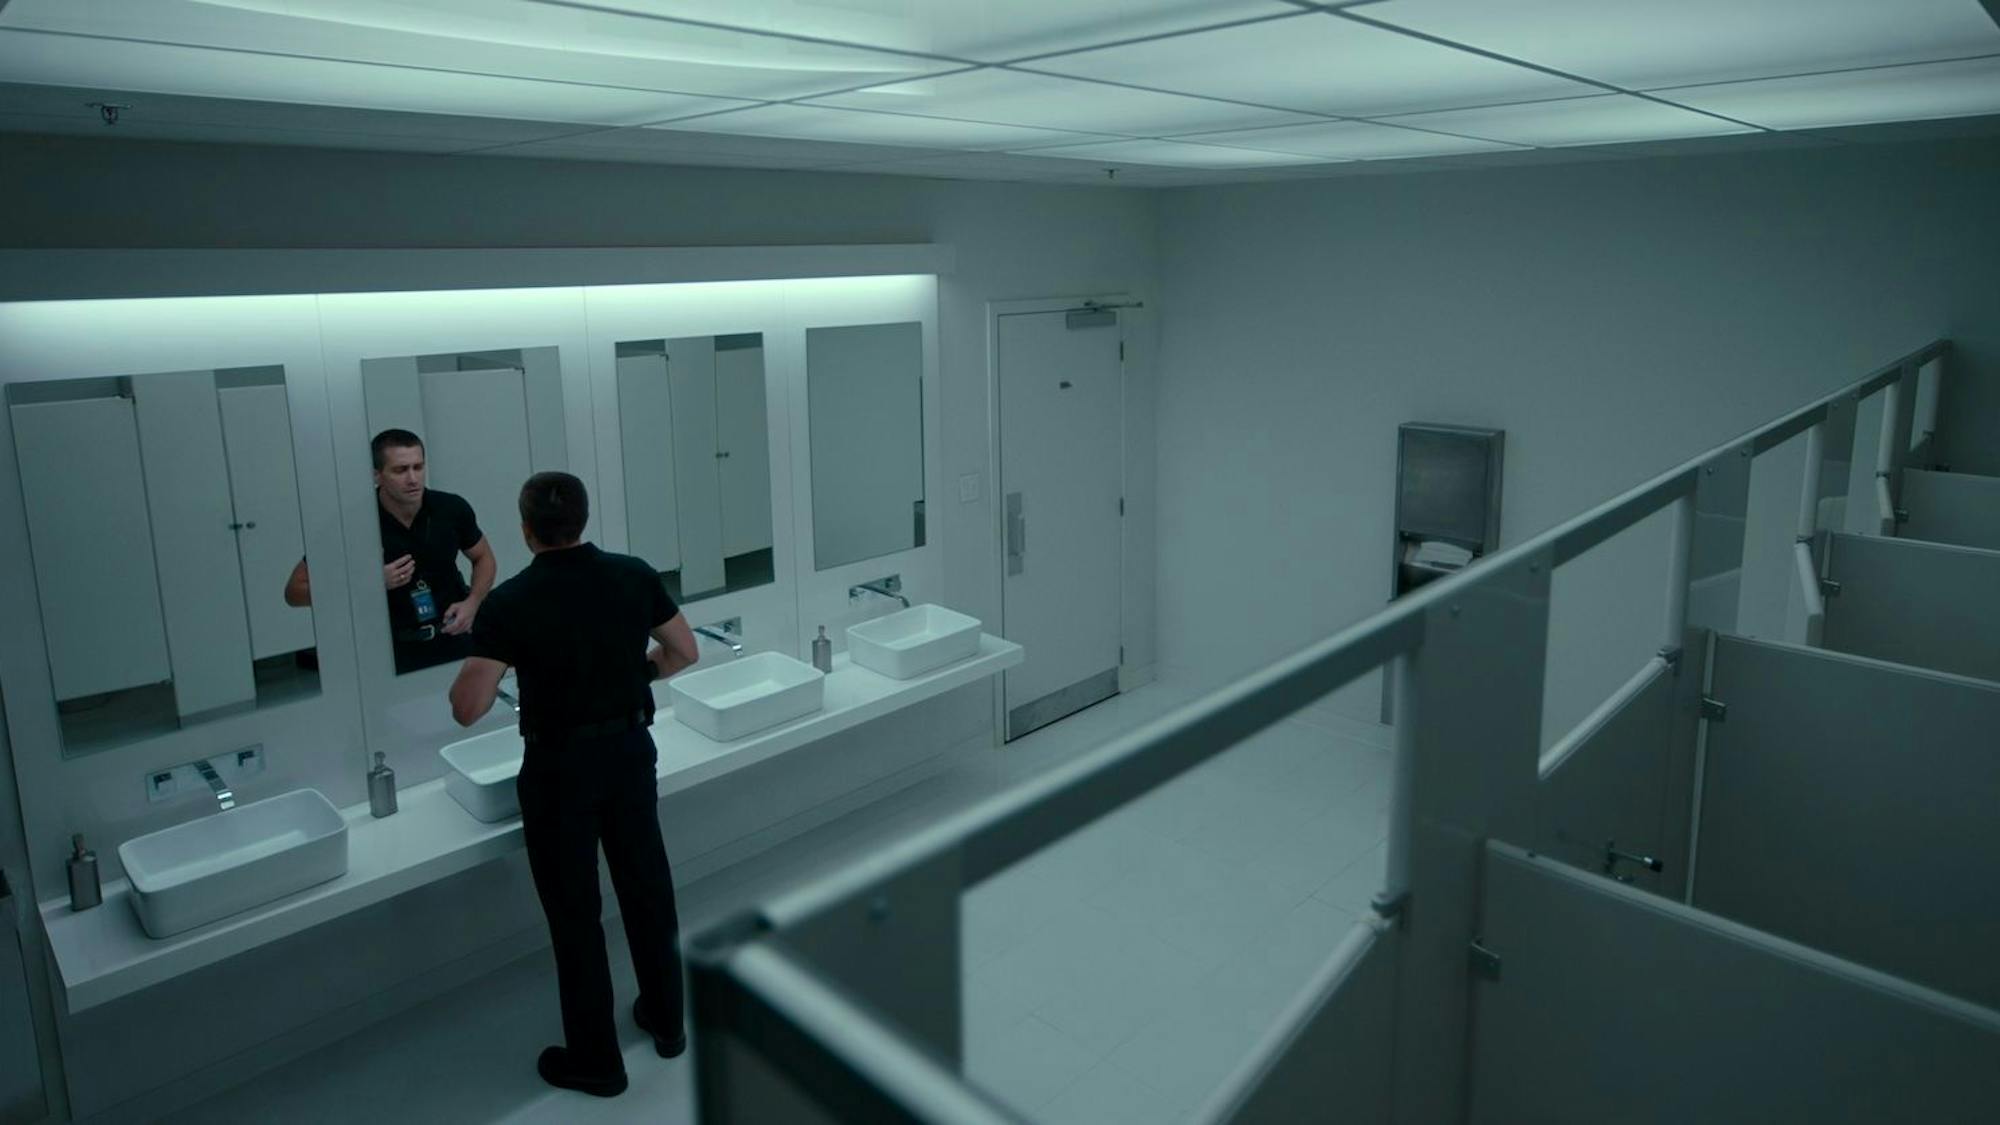 Joe Baylor wears a dark outfit that contrasts with the all white bathroom in which he examines himself in the mirror. 